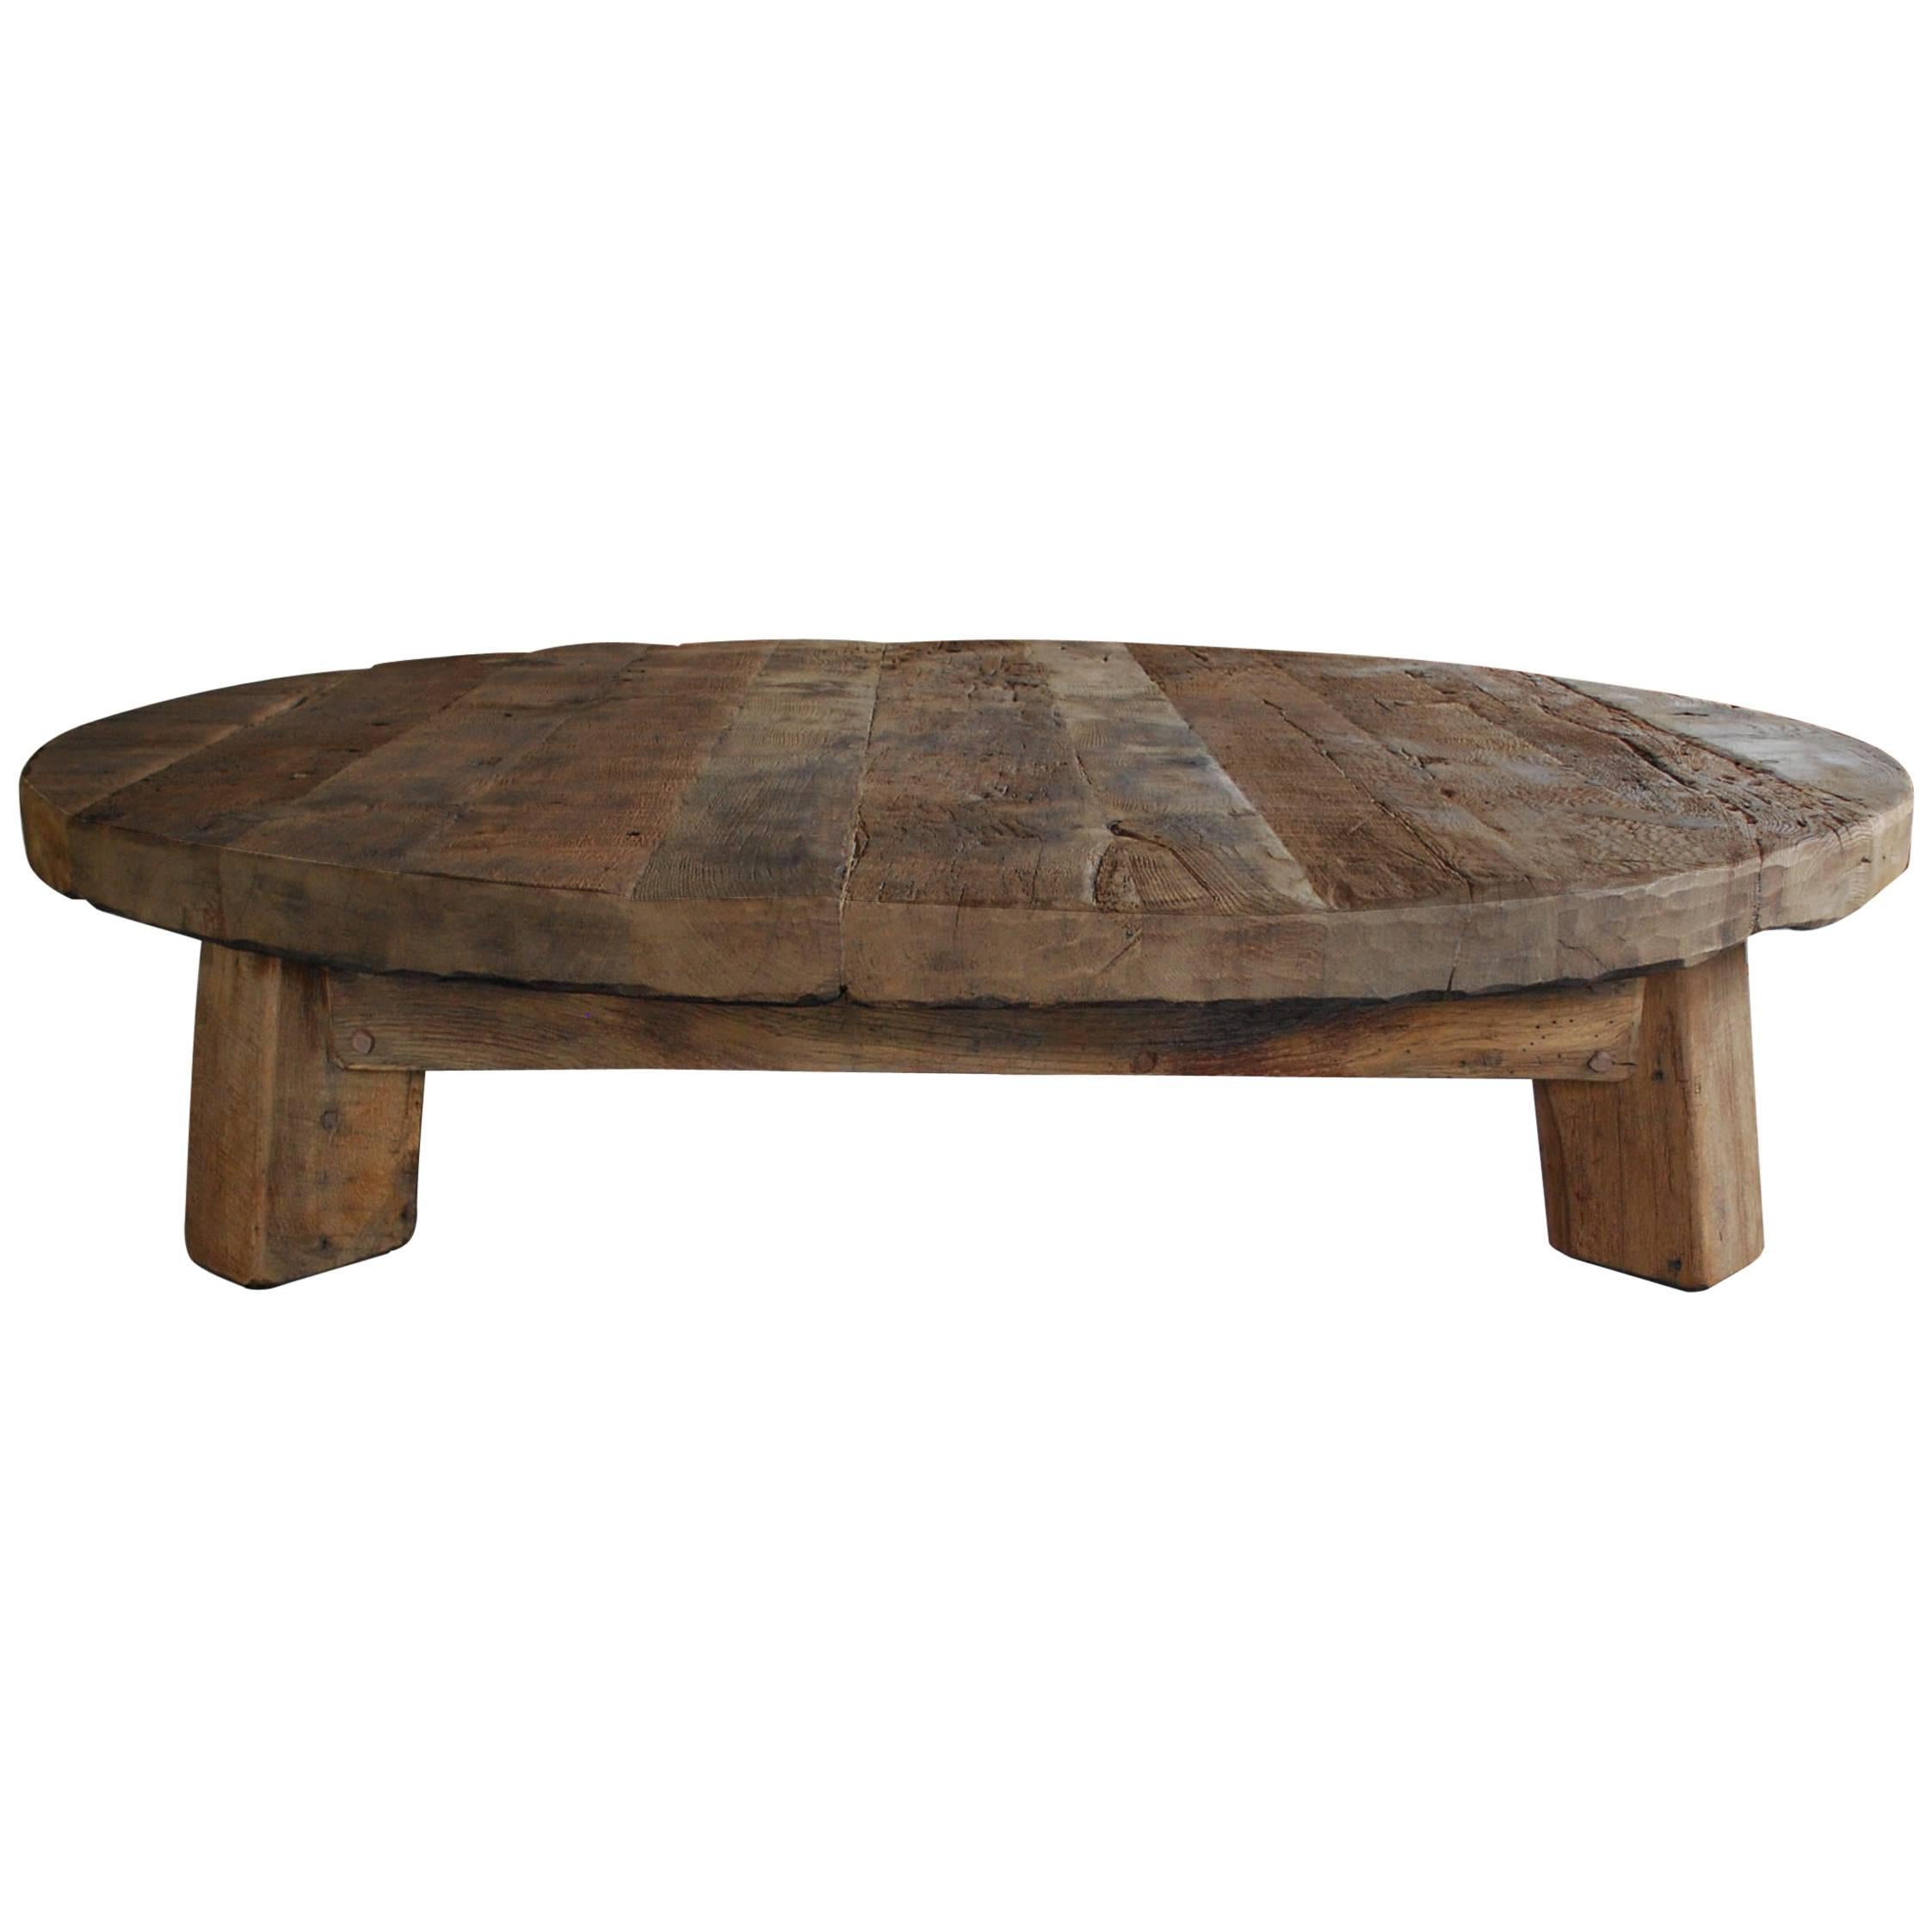 Extremely Large natural cleaned solid oak round Coffee Table / Low Table
